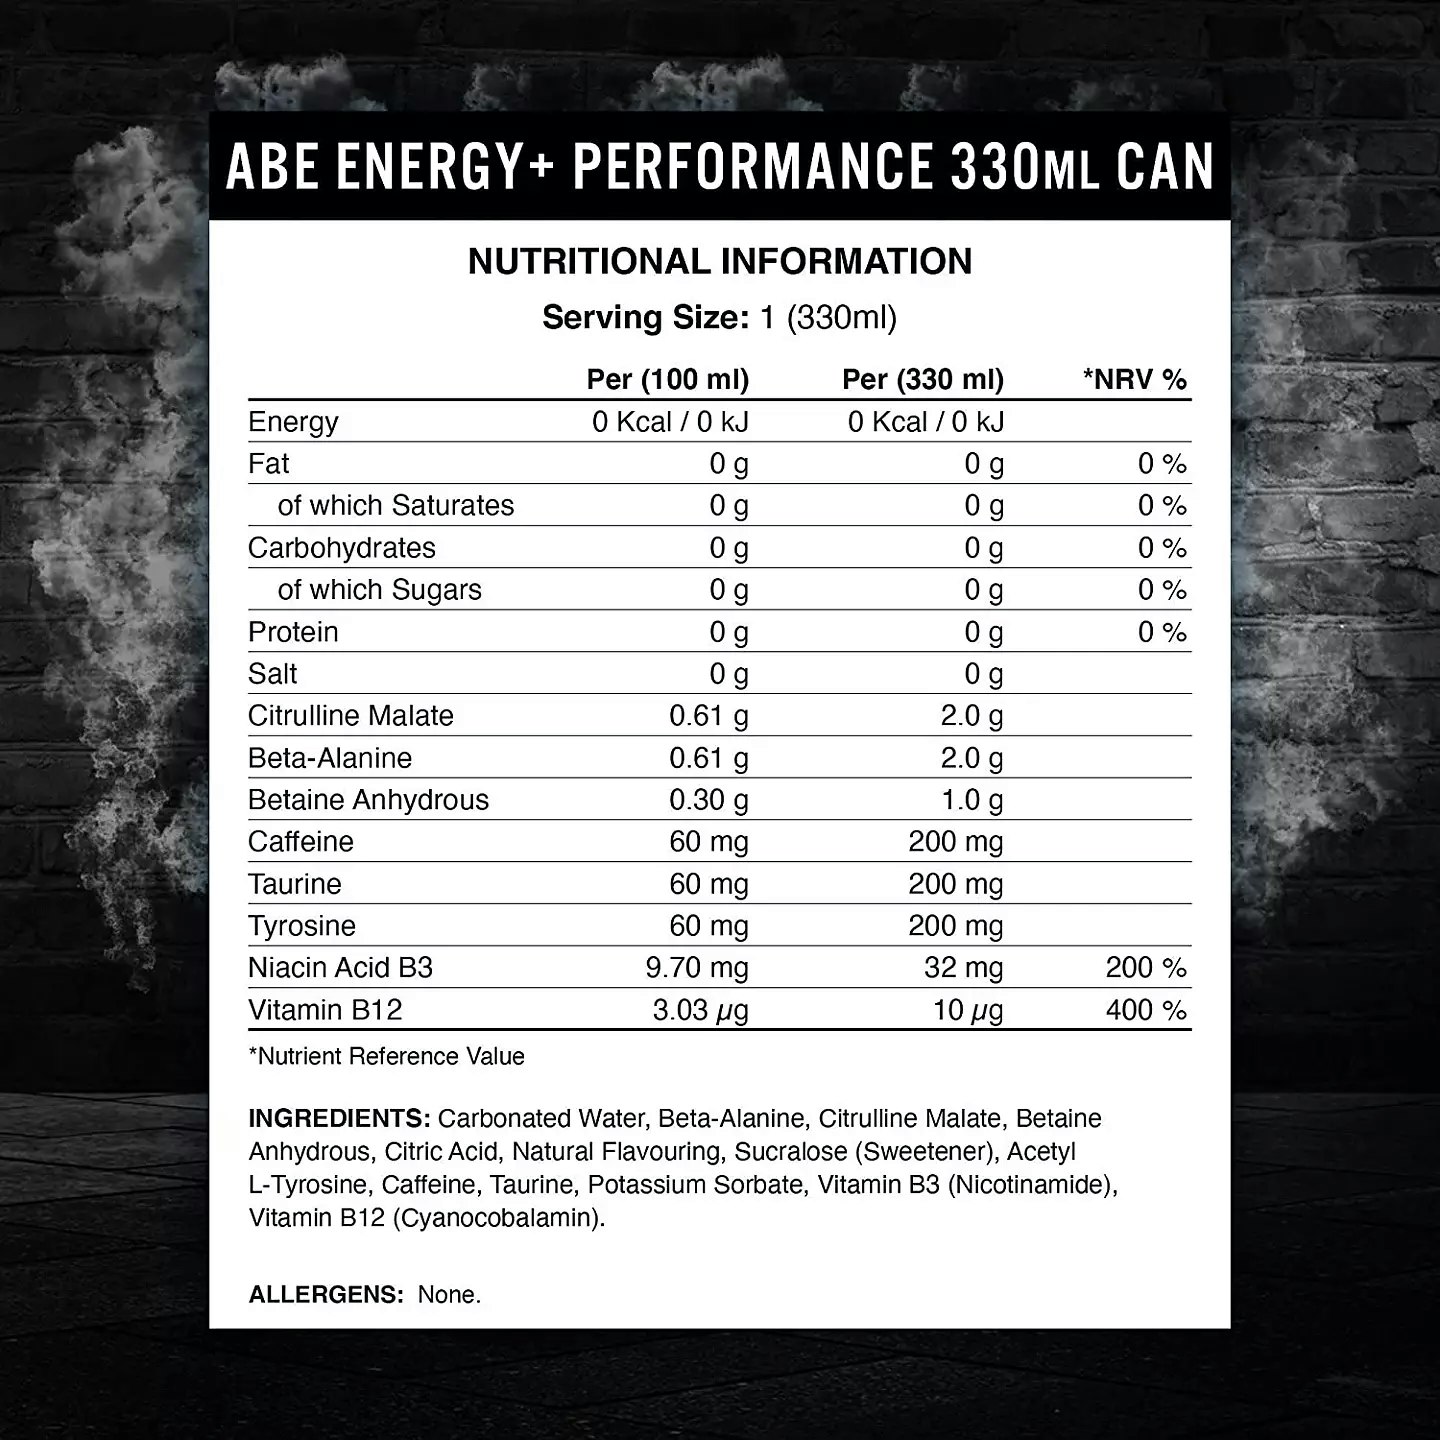 Applied - ABE energy drink Pwo - 330ml